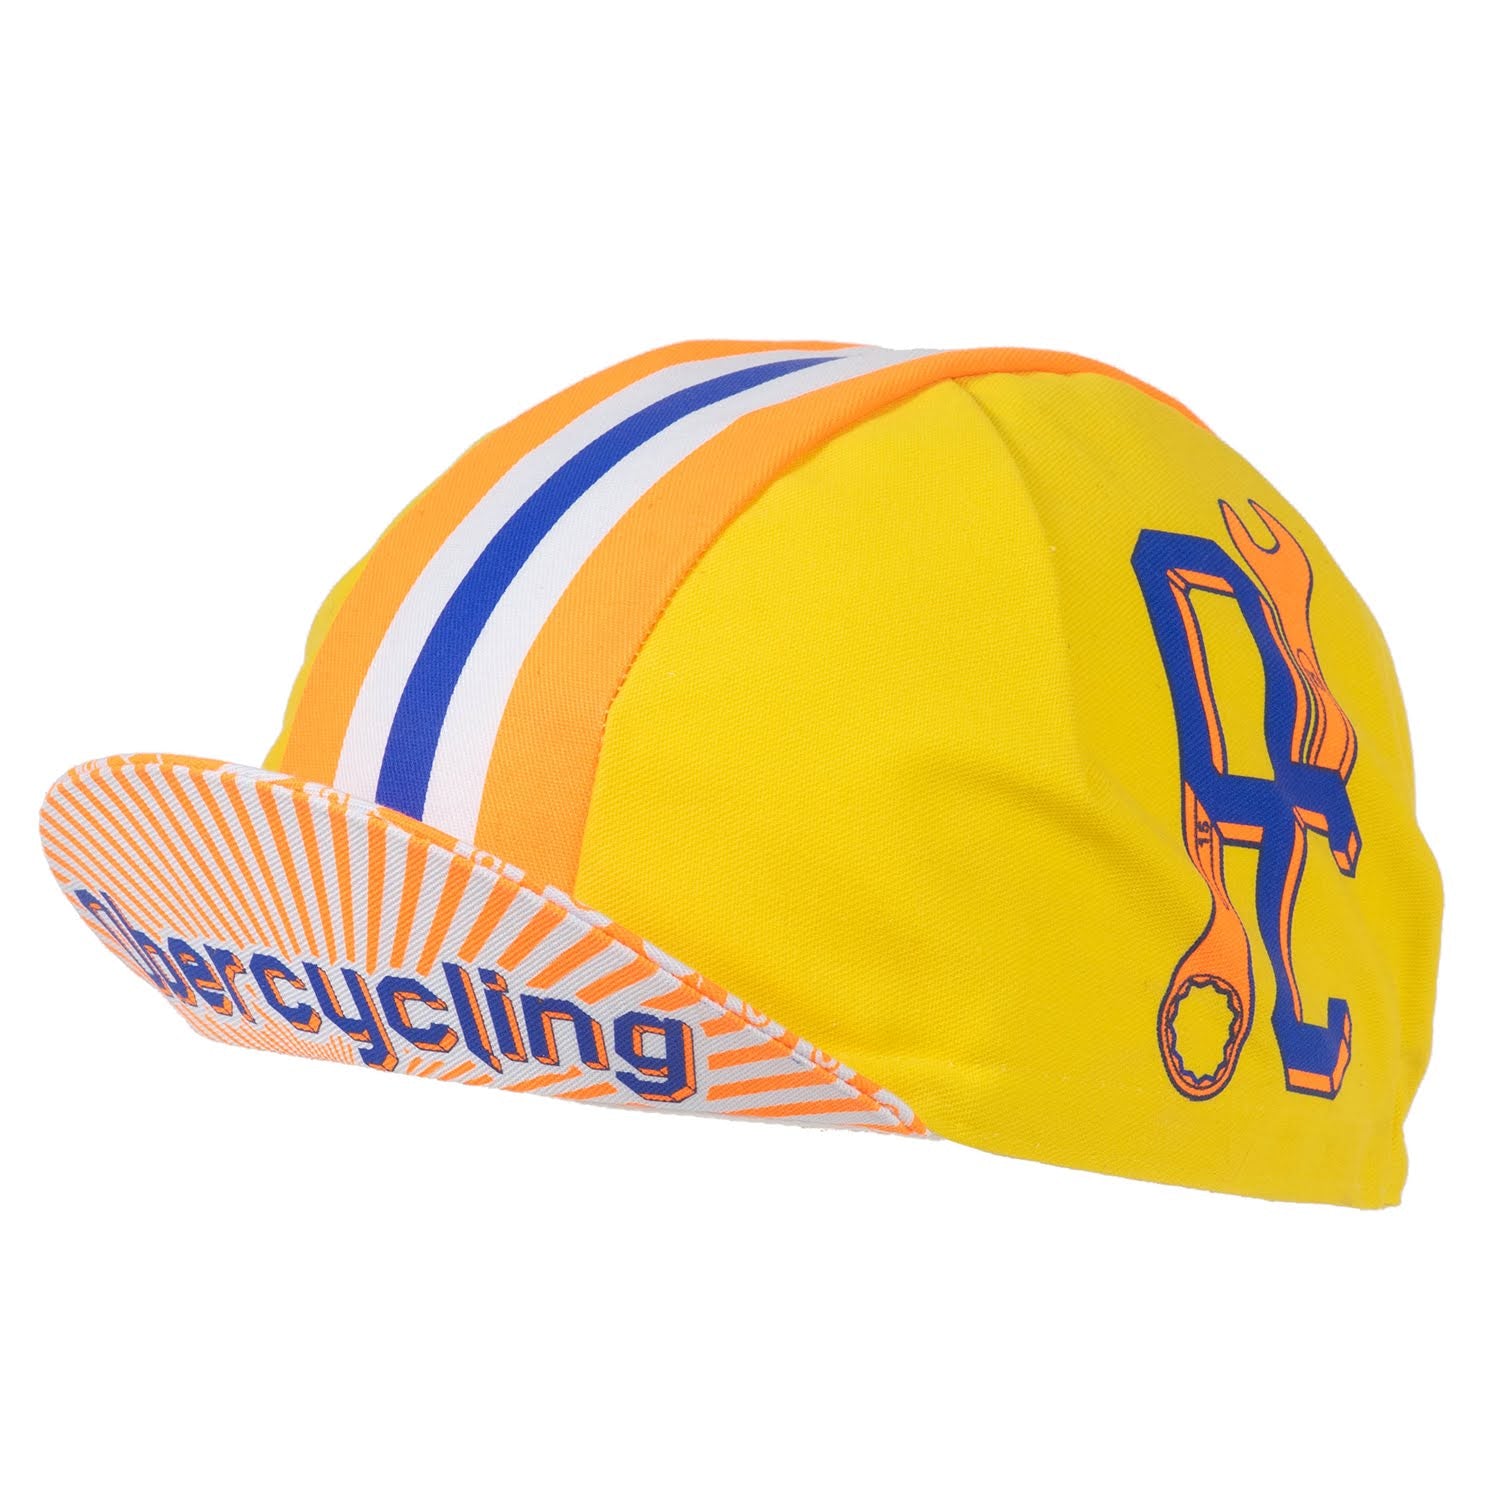 ADAM BELL'S WORKS Obercycling Cycling Cap